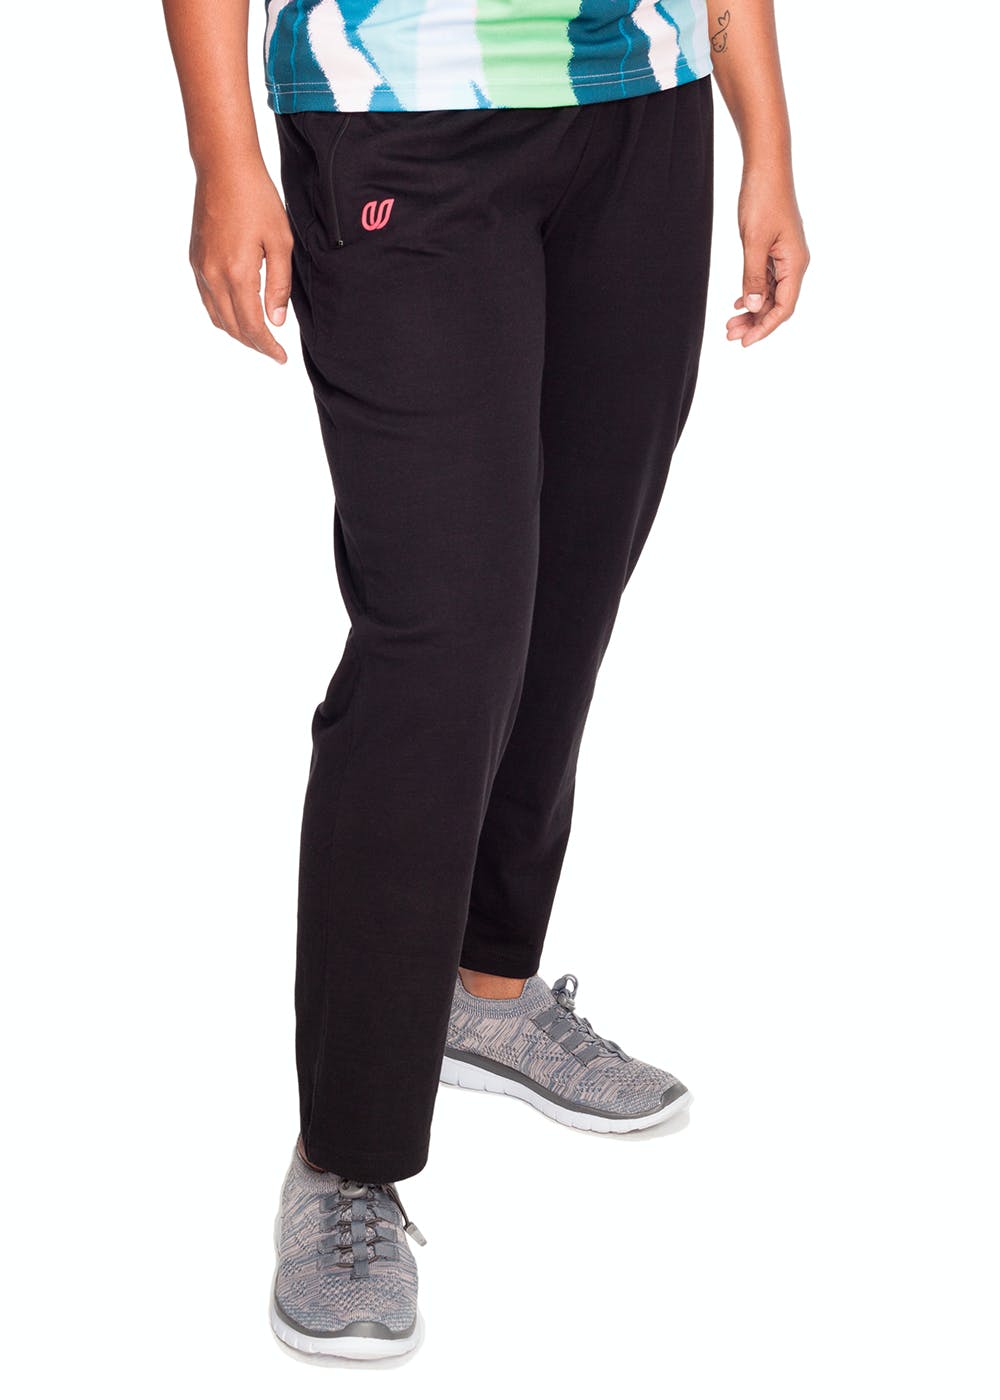 Gym Leggings  Buy Gym Trousers  Gym Pants For Ladies Online at Best  Prices in India  Flipkartcom